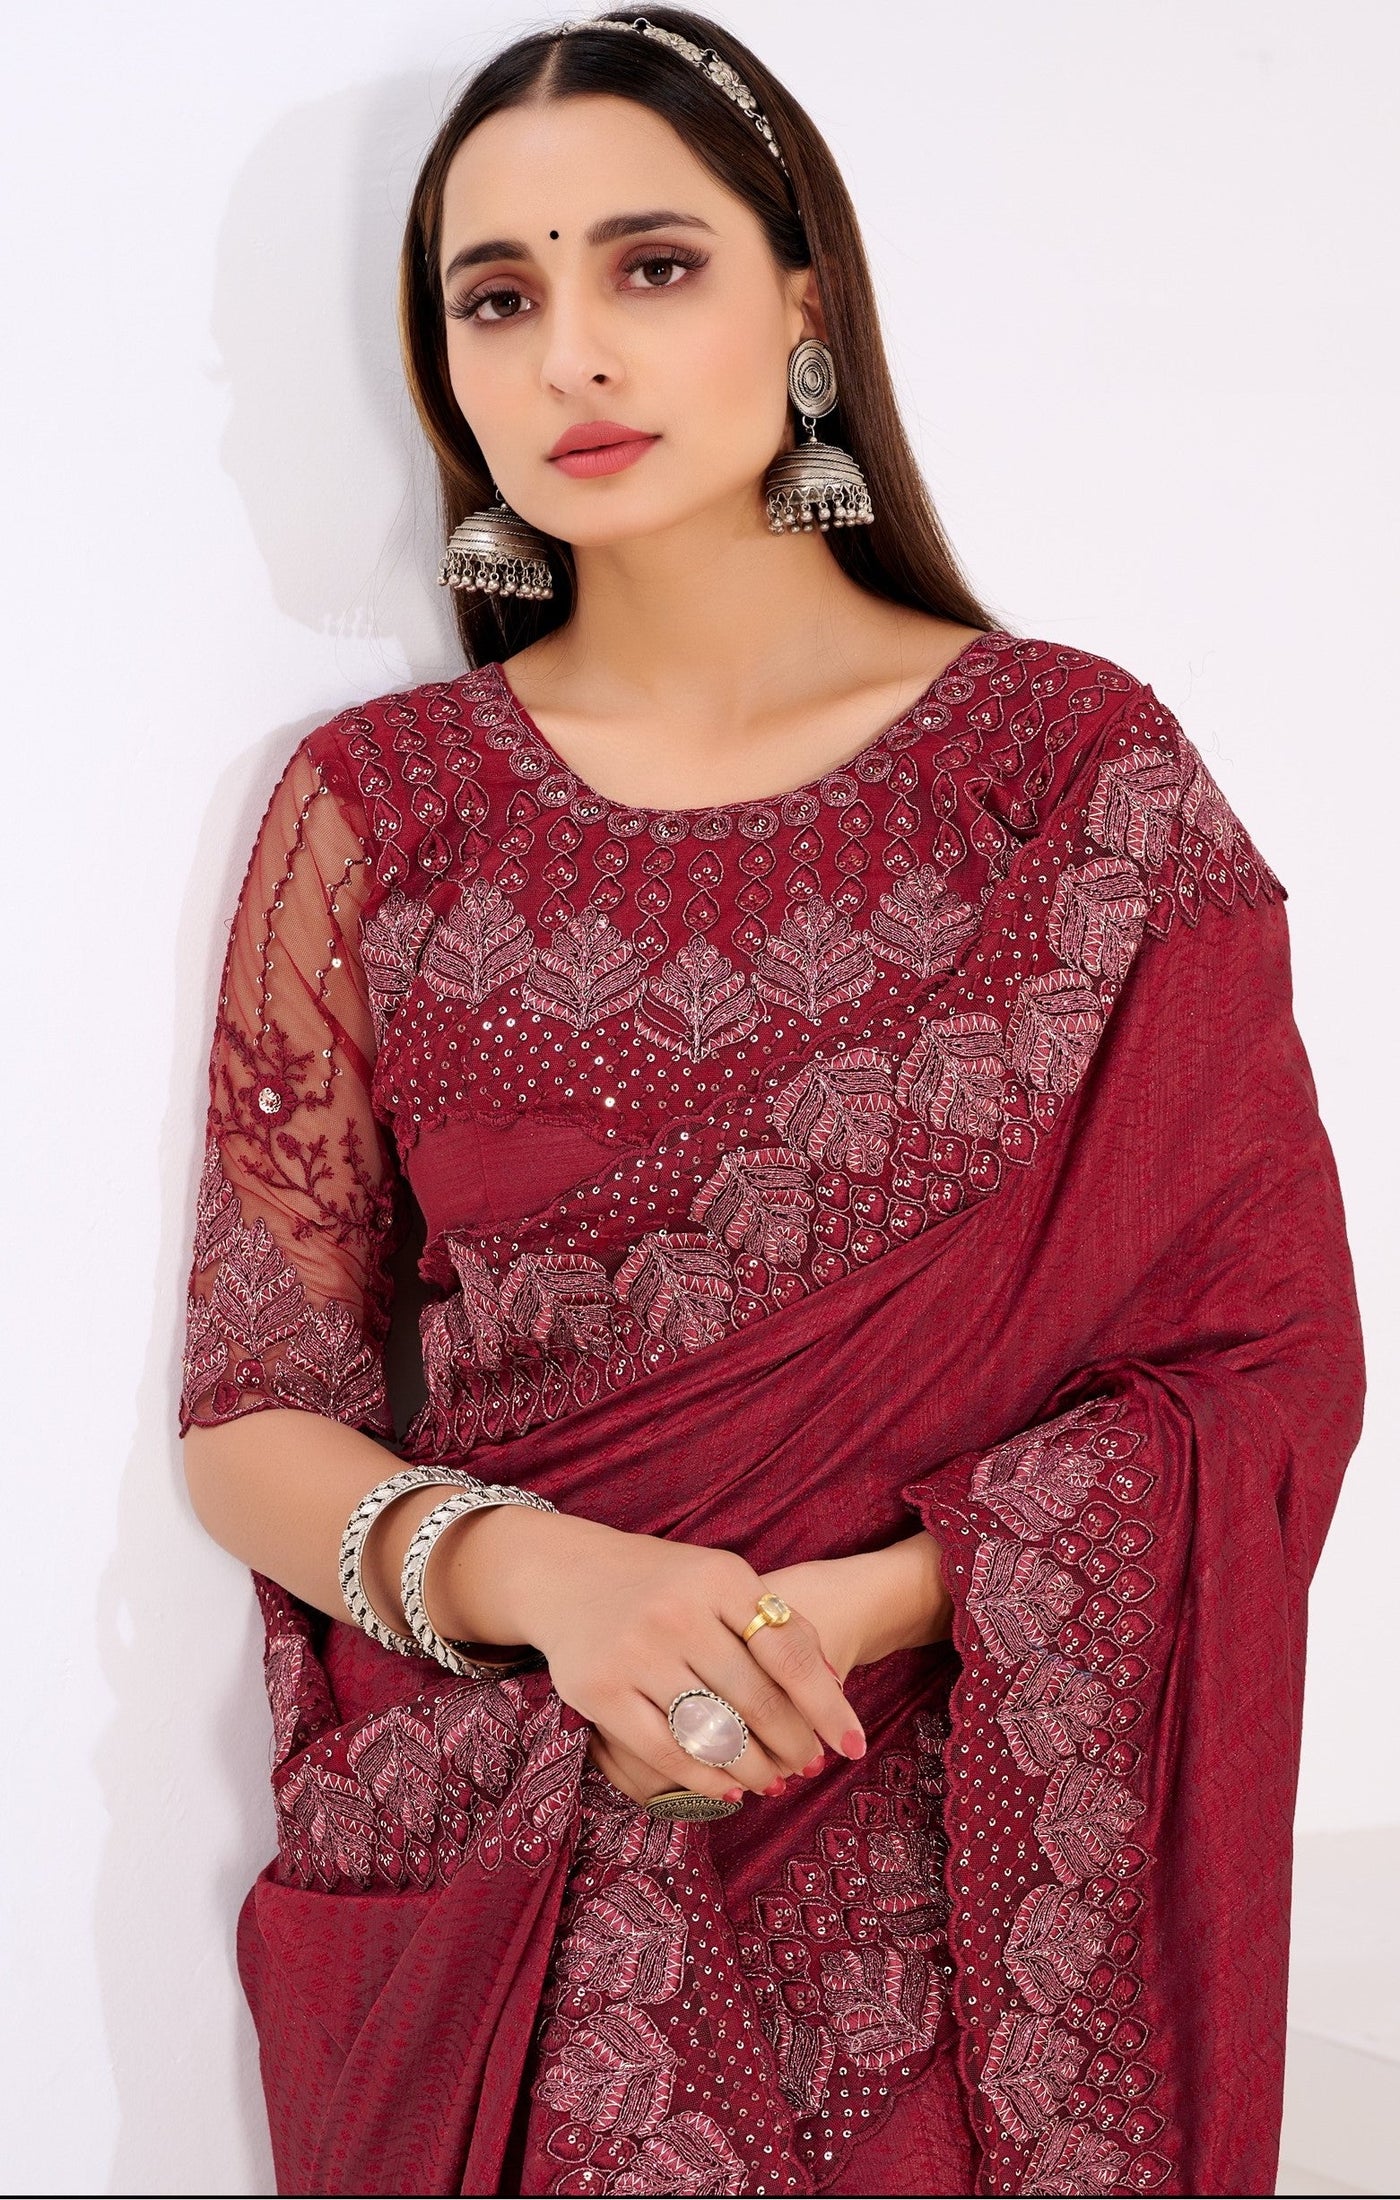 Maroon Jacquard Embroidered Saree With Blouse